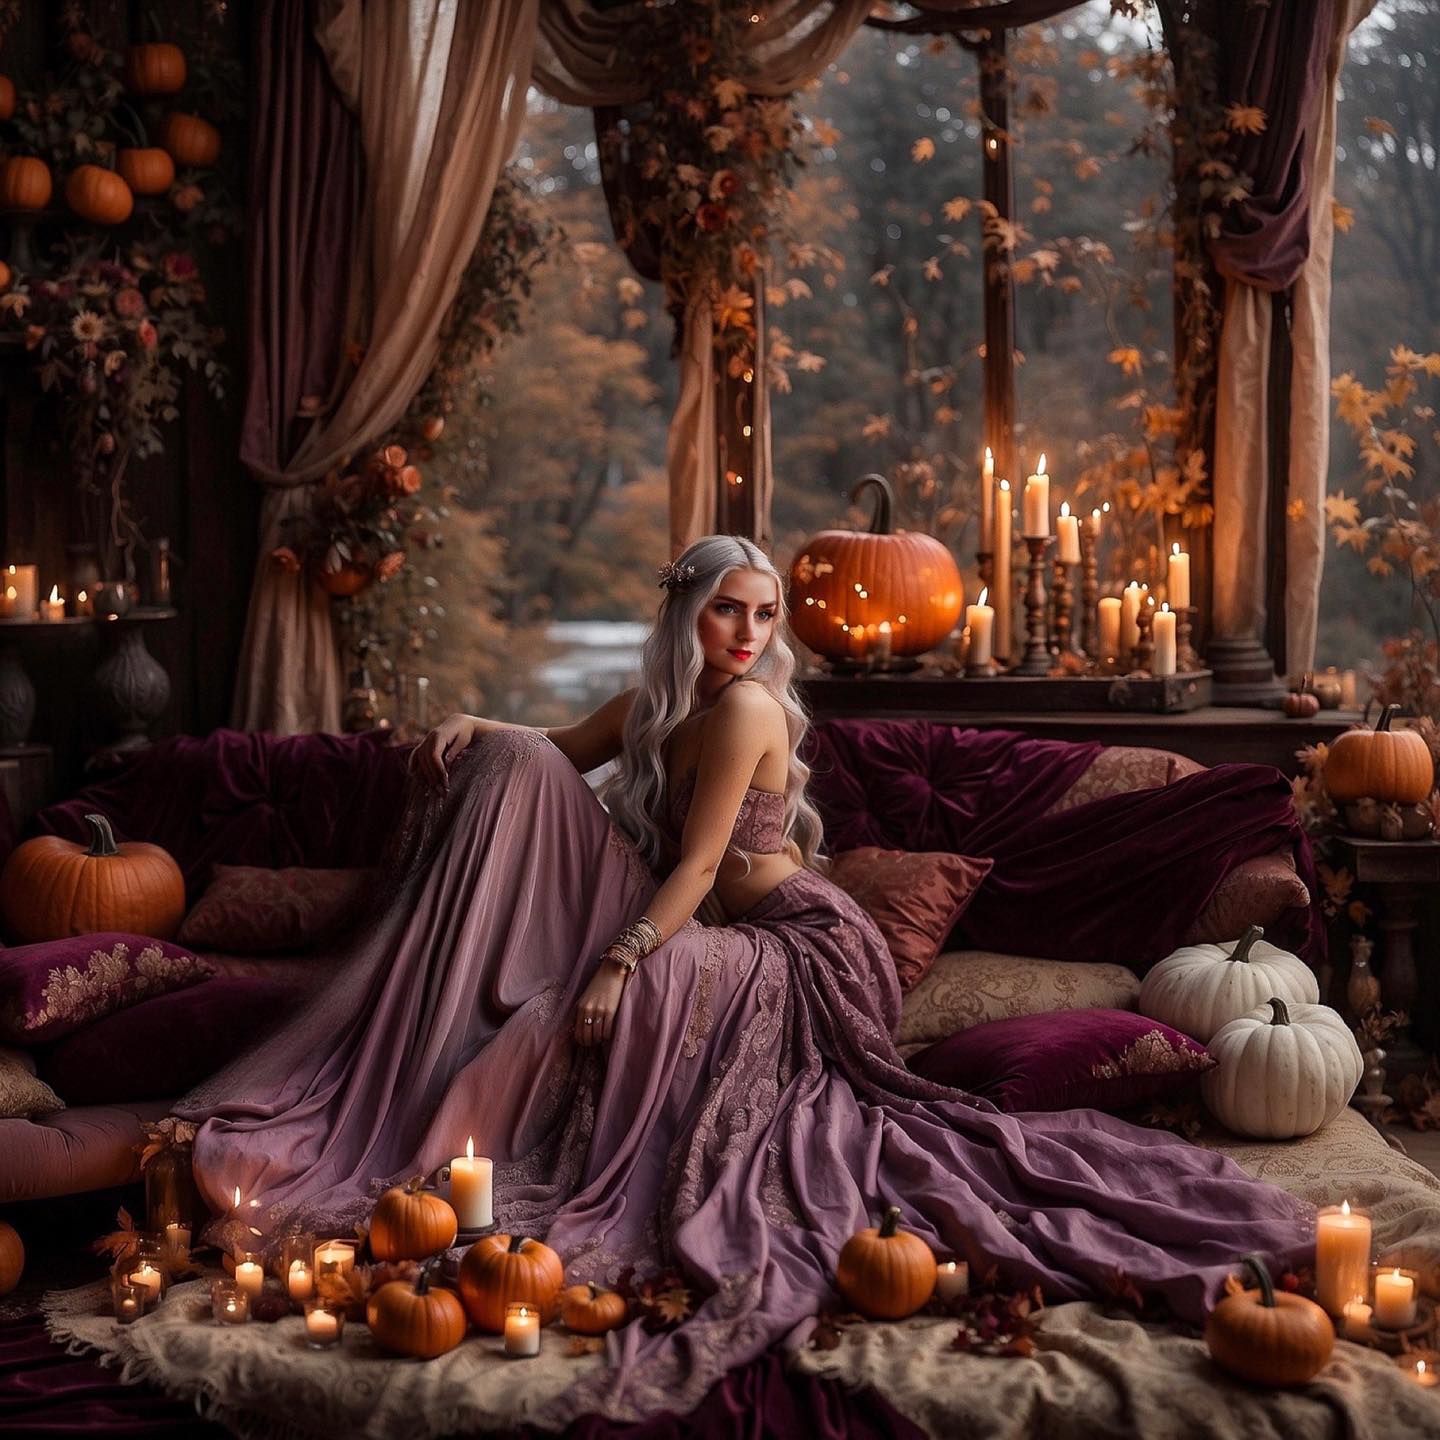 Halloween and Autumn inspired portrait by Alicia Backlund using color tones by onlythecurious